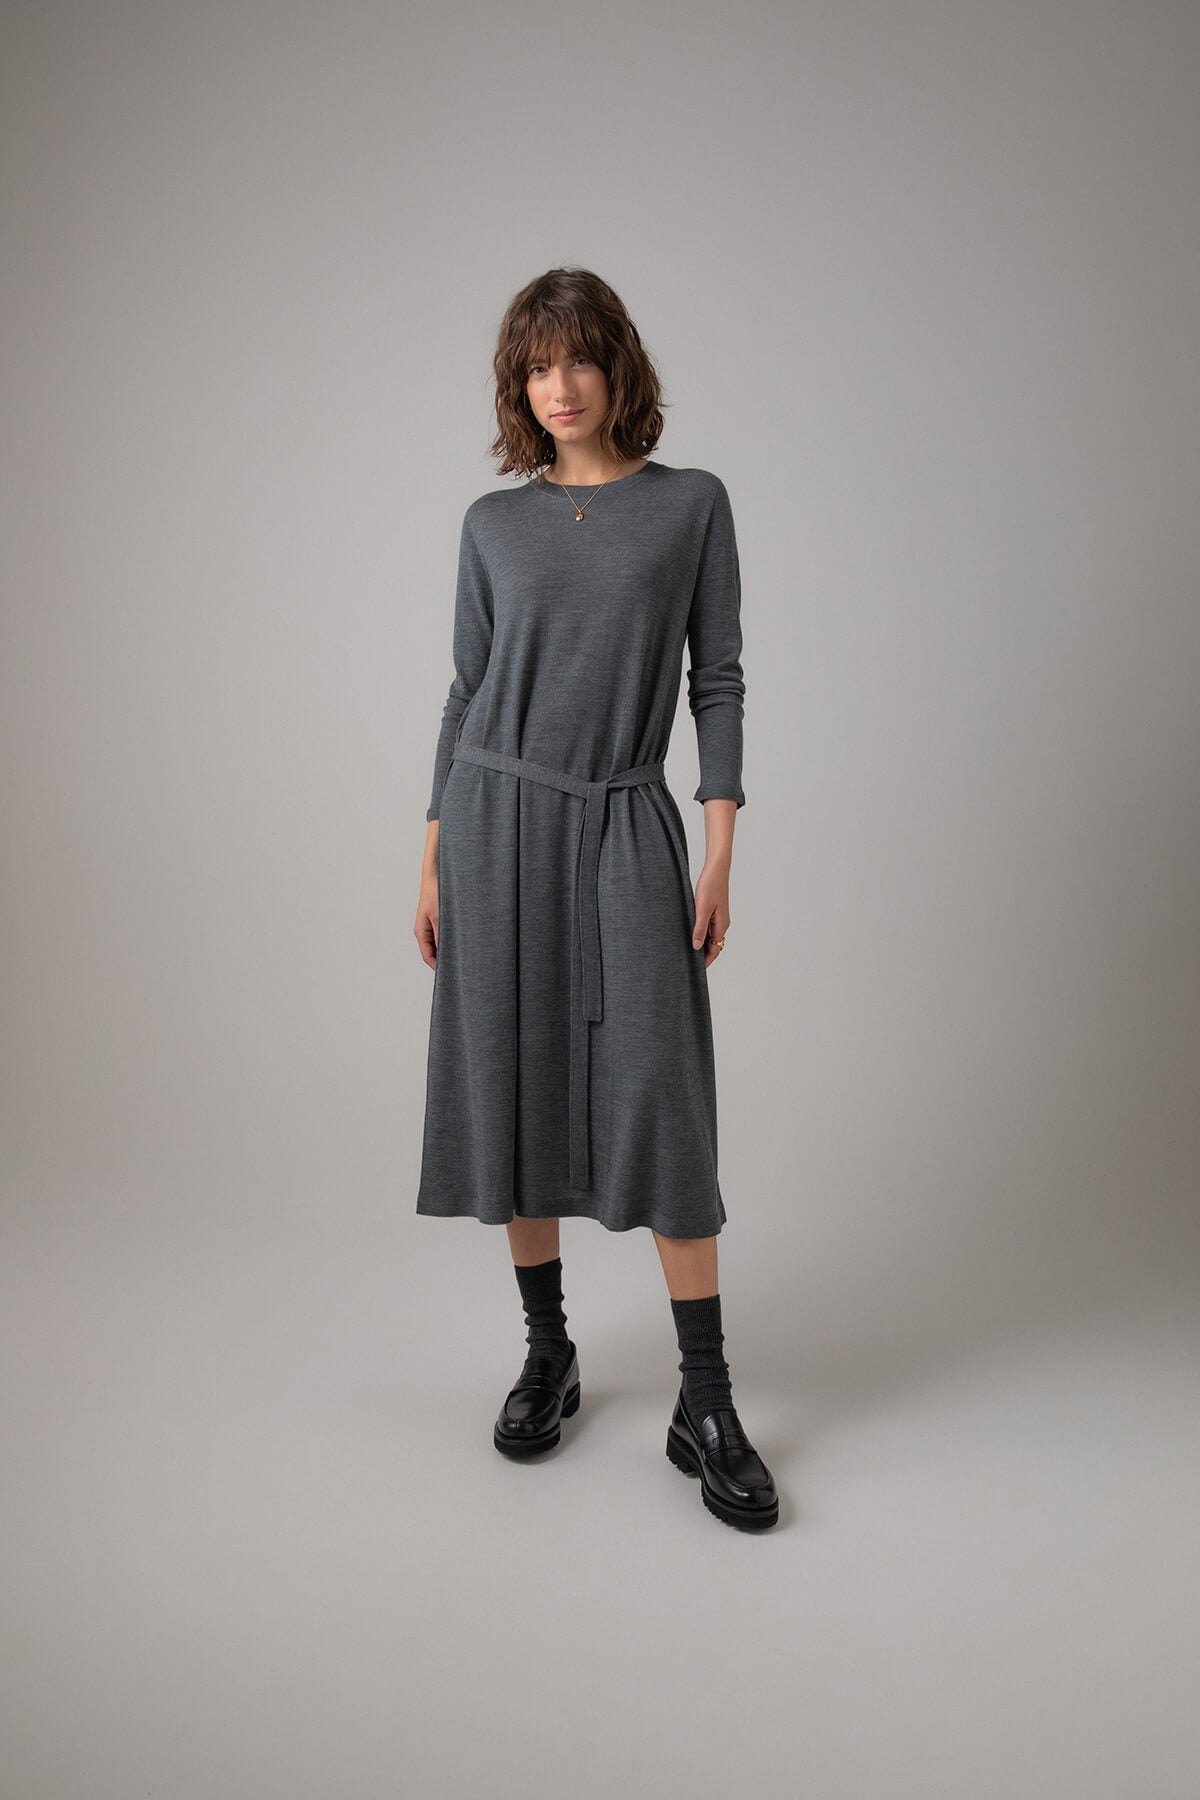 Johnstons of Elgin Women's Superfine Merino Belted T-Shirt Dress in Mid Grey worn with Black Socks & Shoes on a grey background KDI00685HA7166